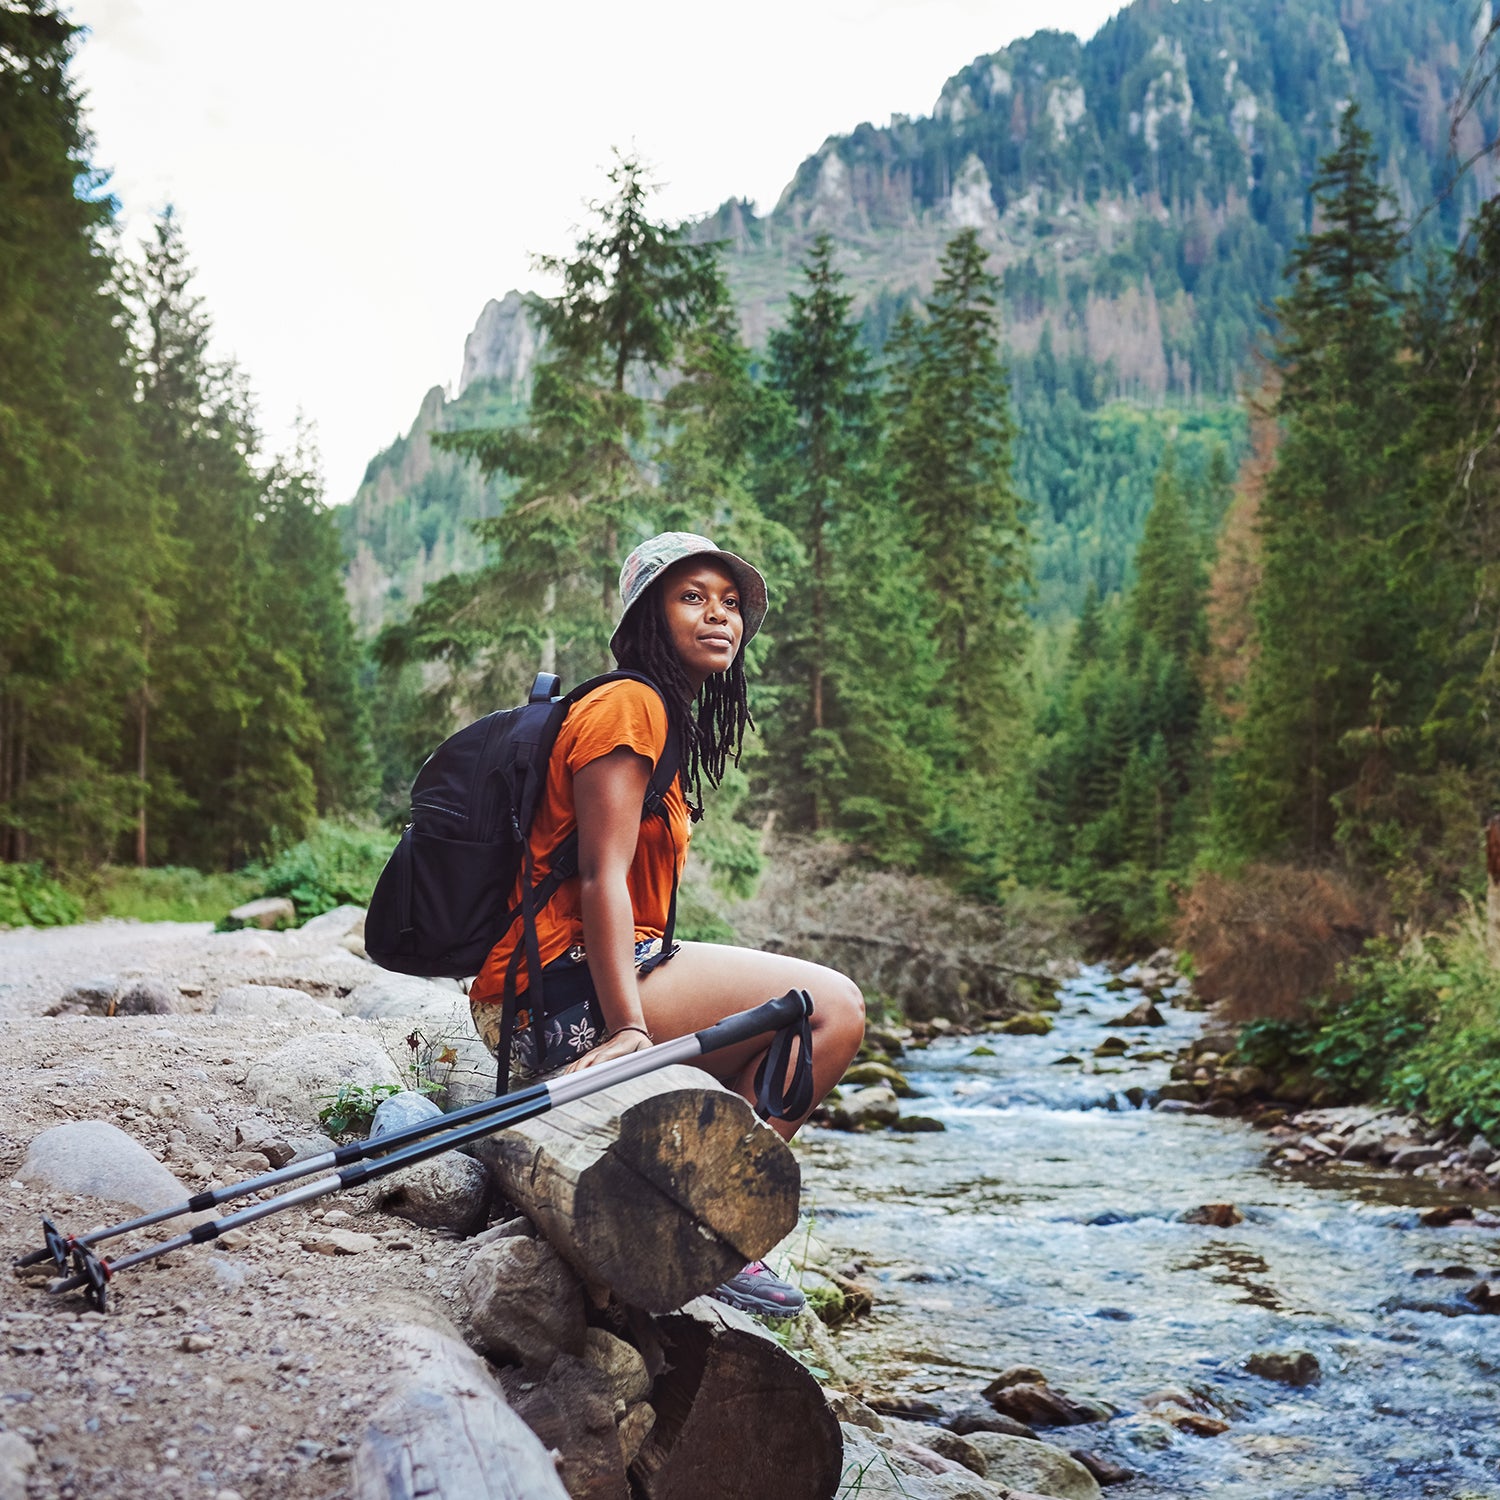 Outdoor Brands Are Making New Hiking Gear for Women